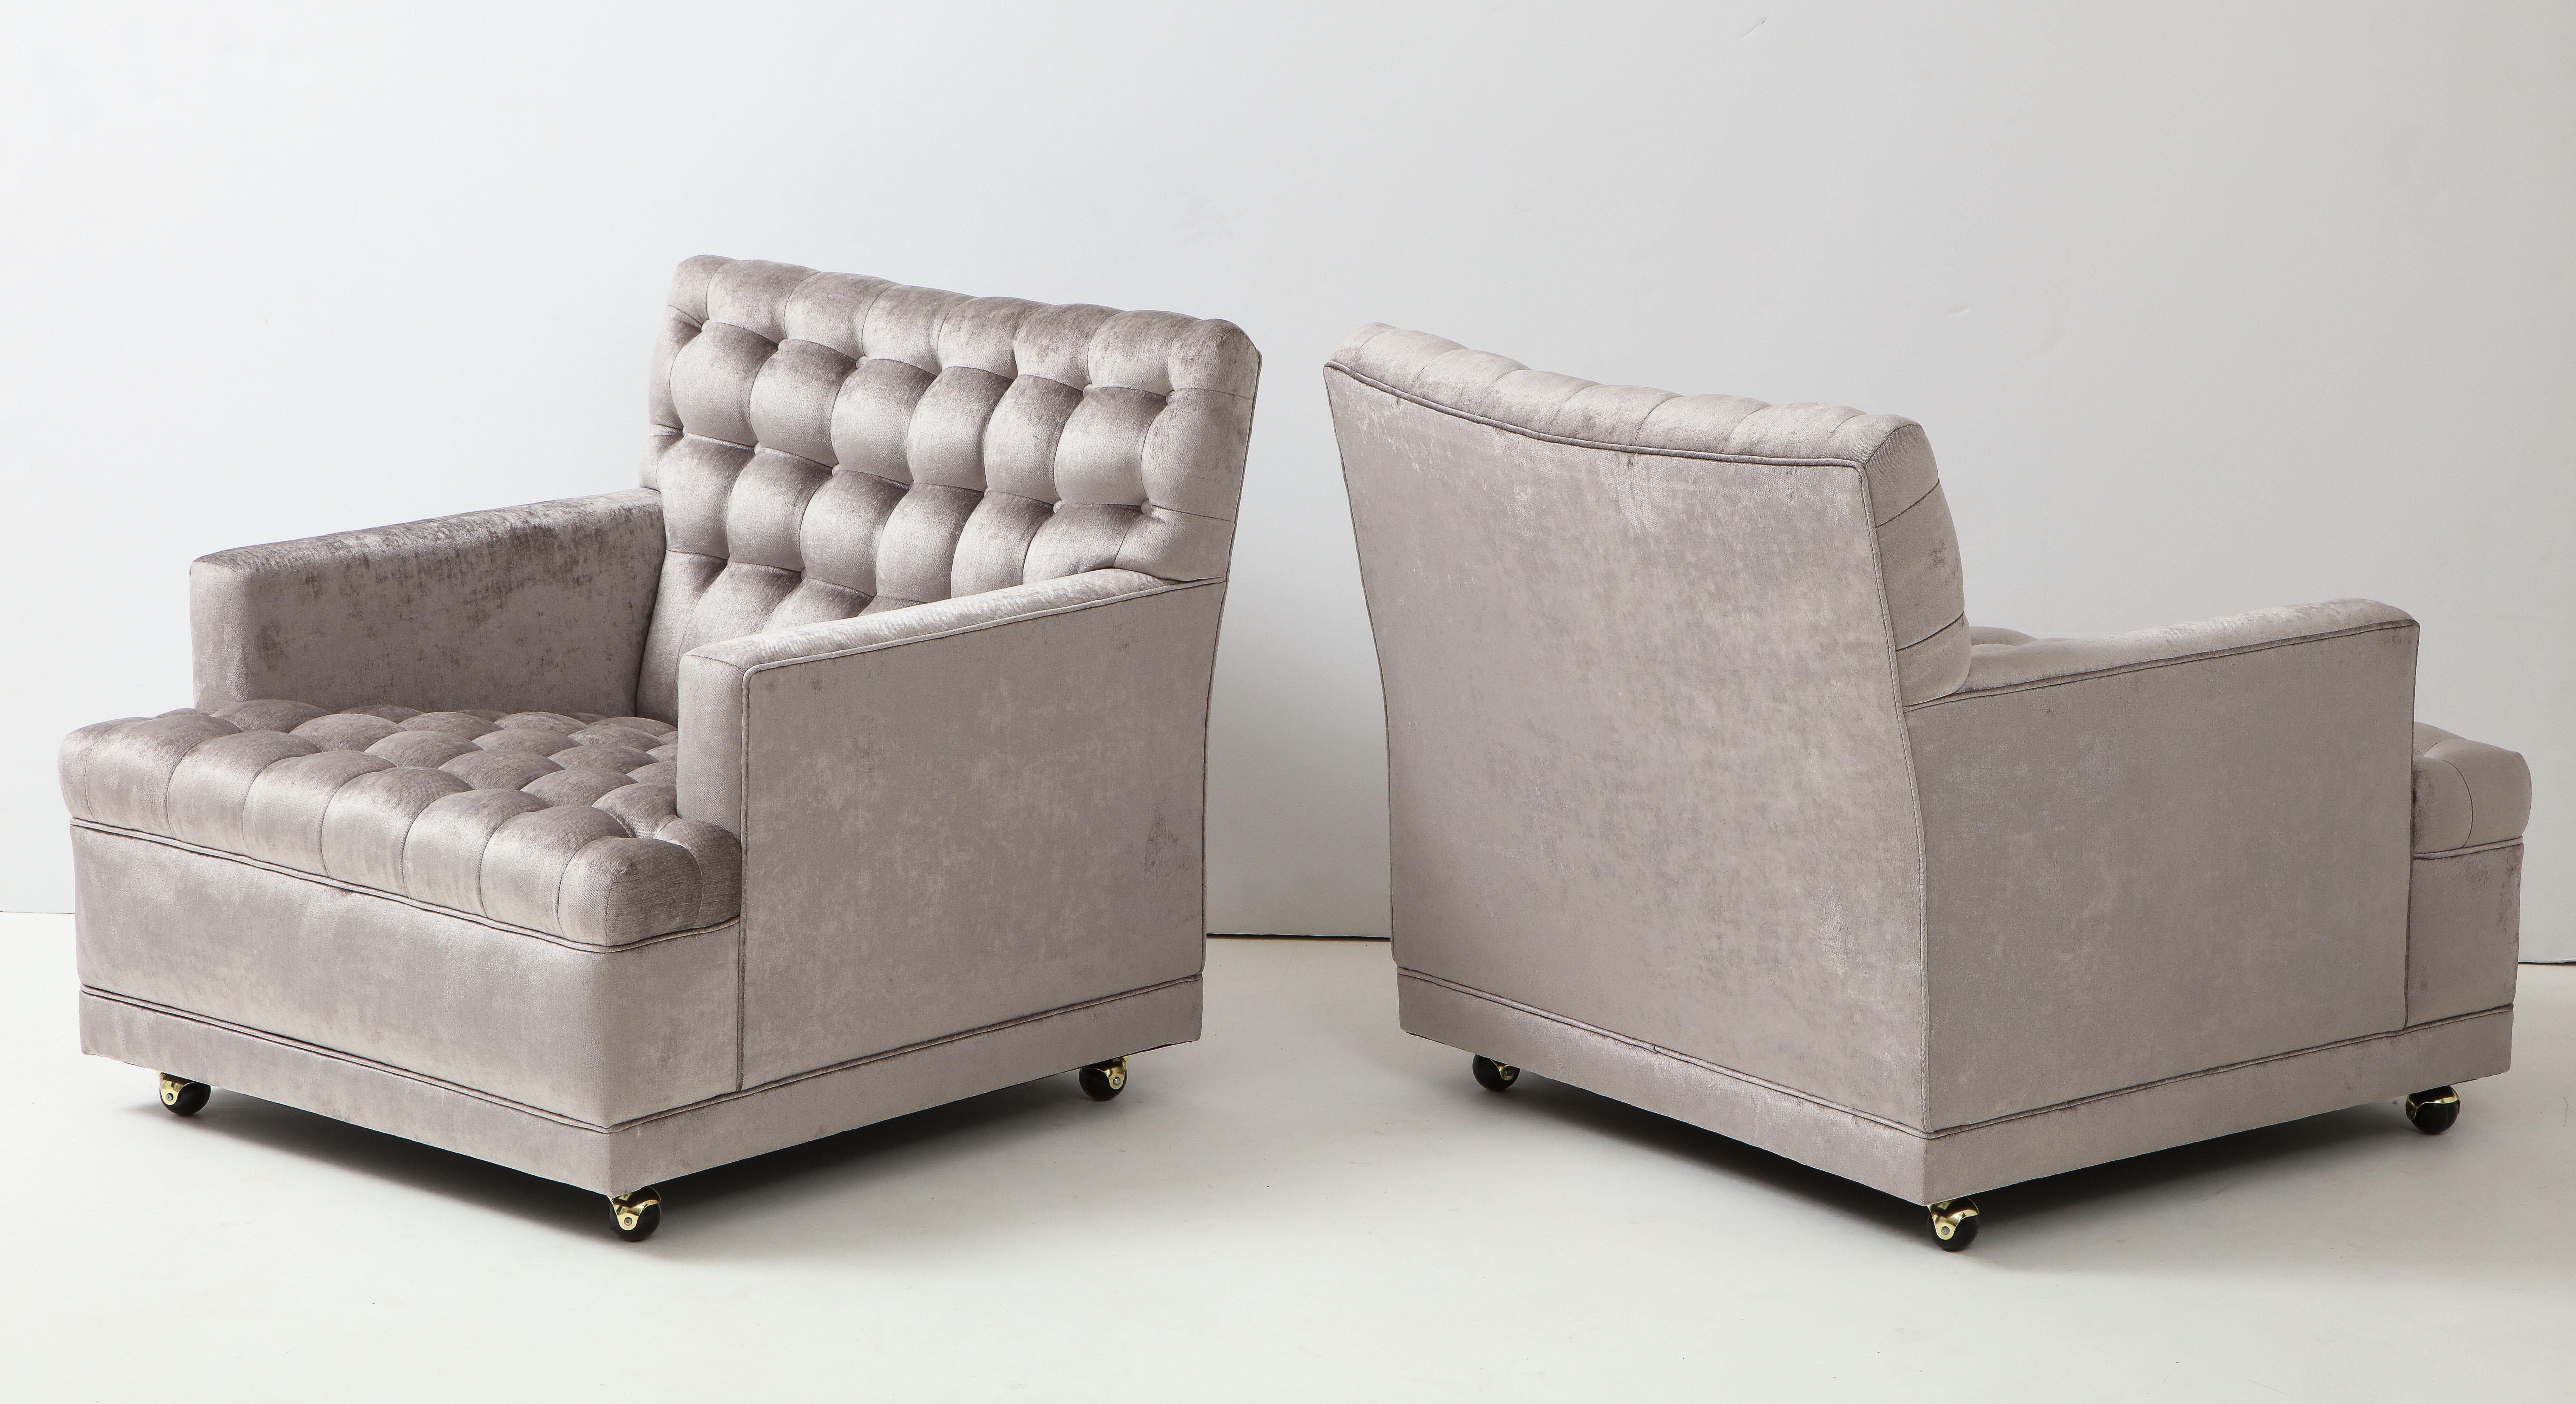 Pair of Biscuit Tufted Club Chairs. 1